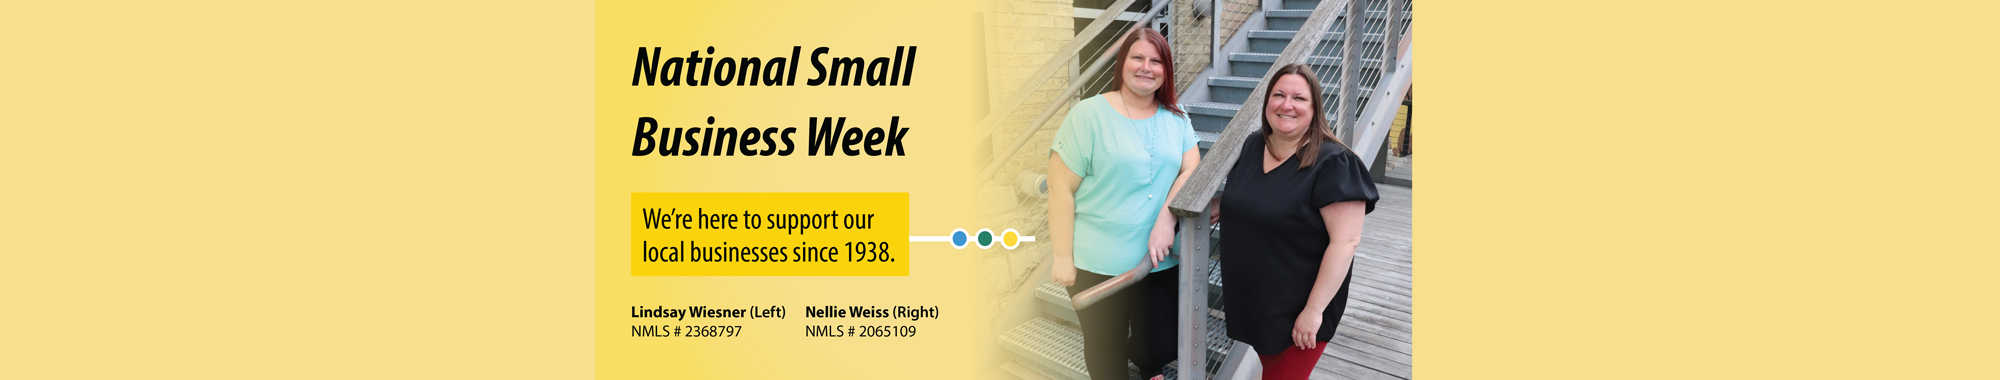 National Small Business Week. We're here to support our local businesses since 1938.